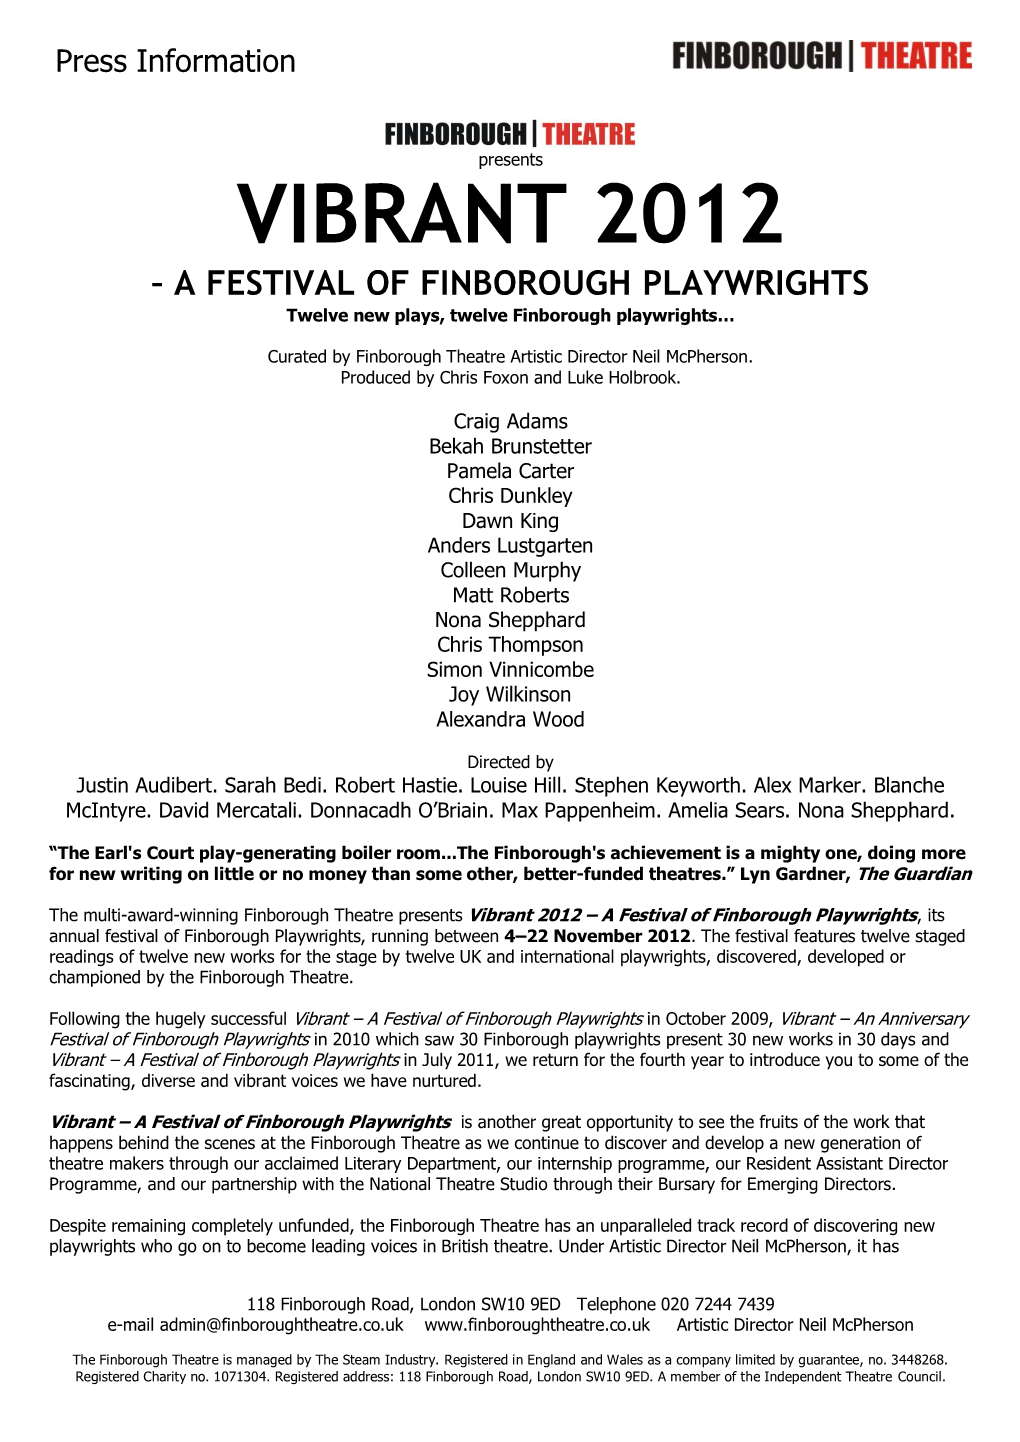 VIBRANT 2012 – a FESTIVAL of FINBOROUGH PLAYWRIGHTS Twelve New Plays, Twelve Finborough Playwrights…